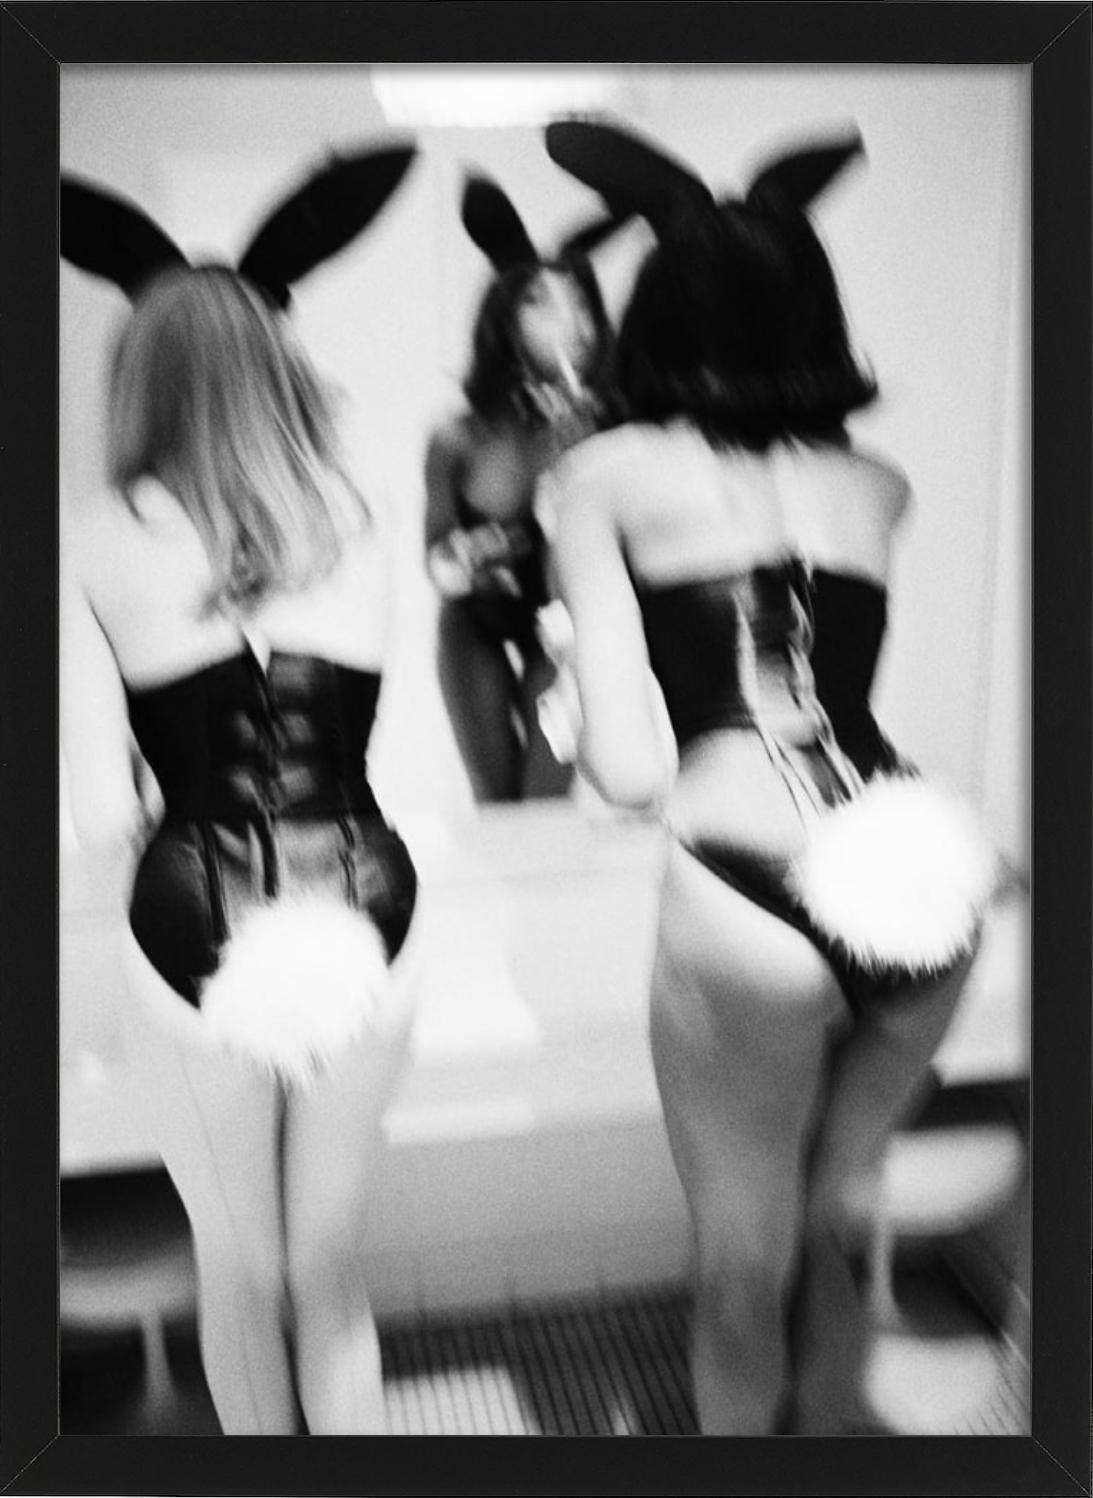 Playboy Bunnies, NYC - Models in front of a mirror, fine art photography, 1995 For Sale 1